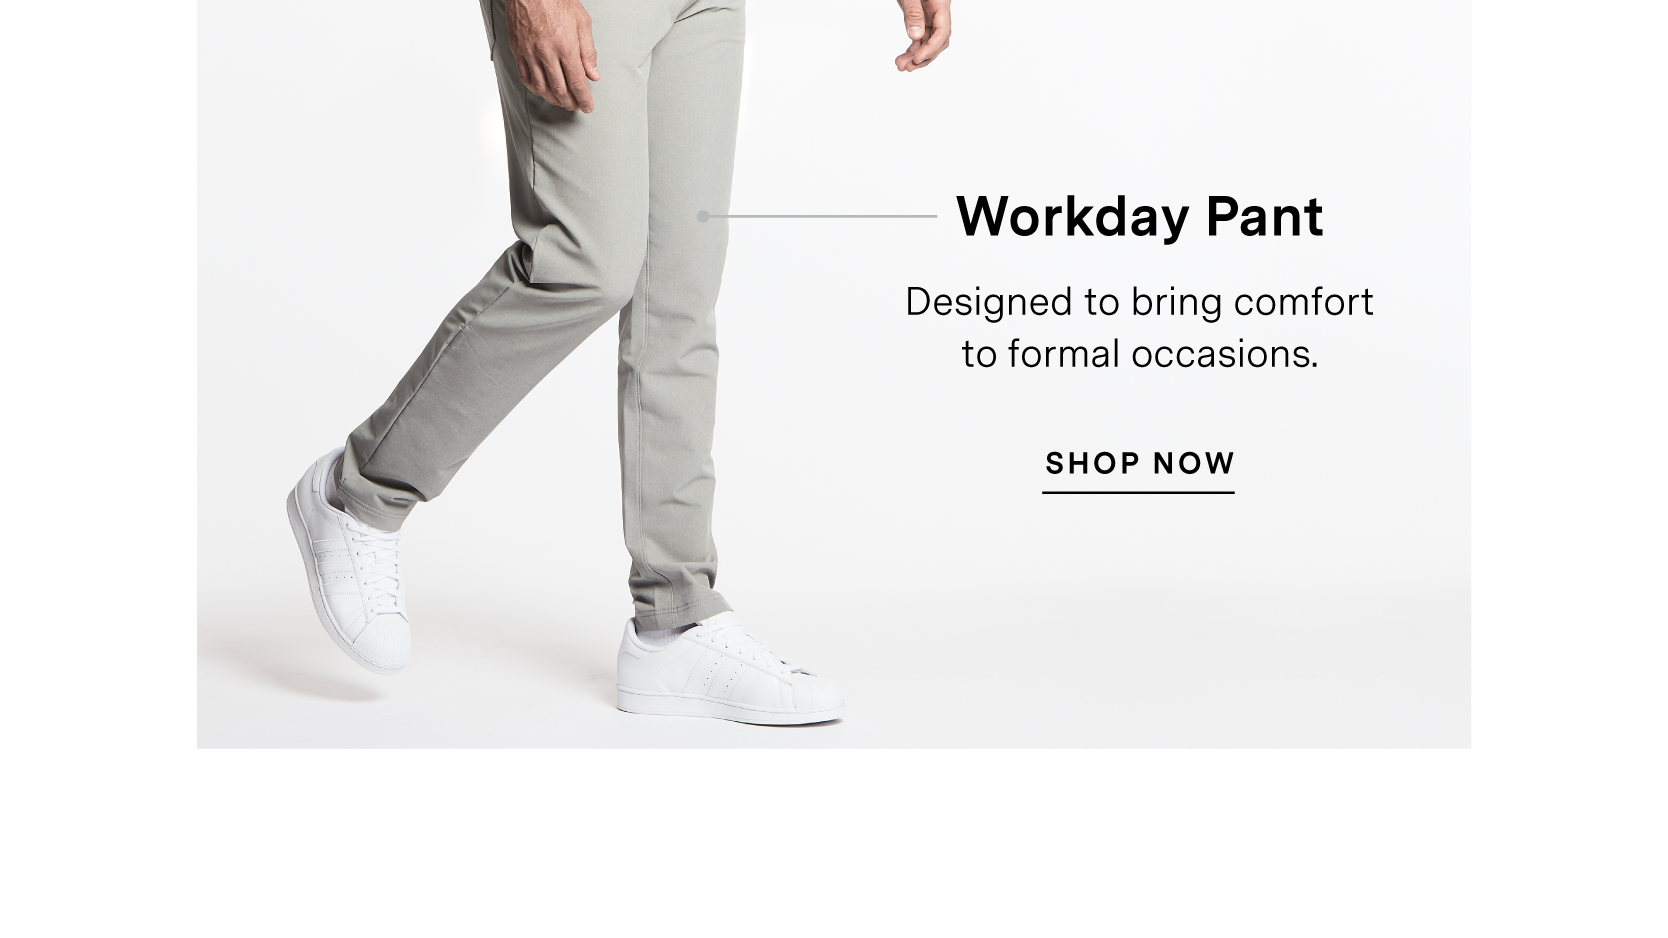 Workday Pant. SHOP NOW